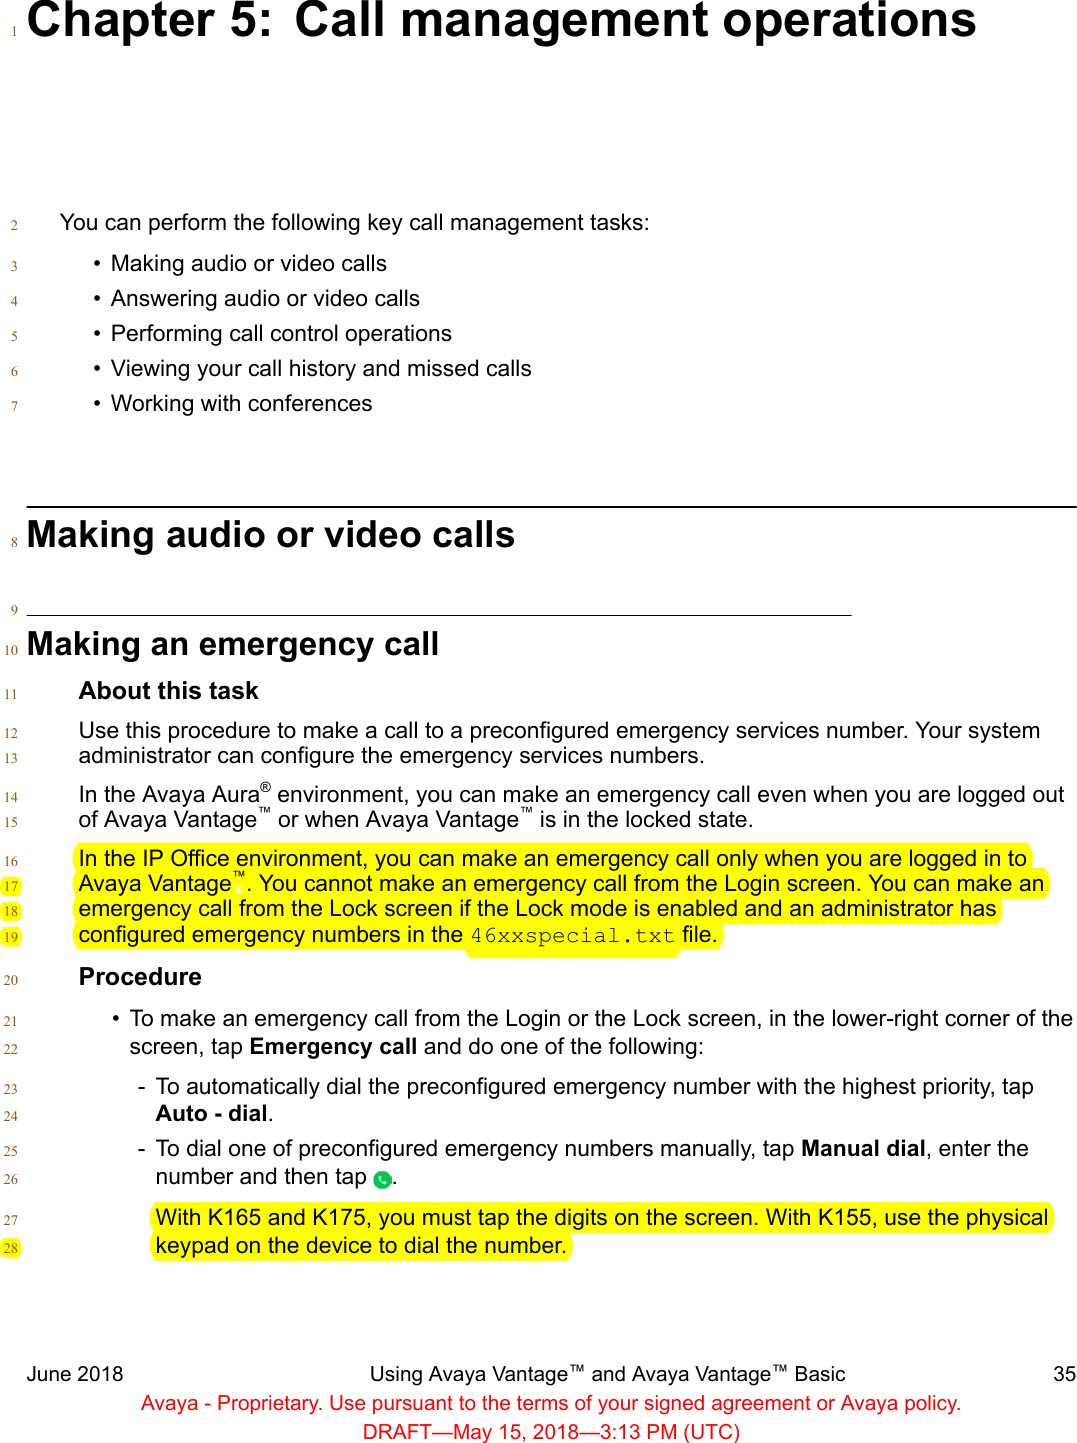 Chapter 5: Call management operations1You can perform the following key call management tasks:2• Making audio or video calls3• Answering audio or video calls4• Performing call control operations5• Viewing your call history and missed calls6• Working with conferences7Making audio or video calls89Making an emergency call10About this task11Use this procedure to make a call to a preconfigured emergency services number. Your system12administrator can configure the emergency services numbers.13In the Avaya Aura® environment, you can make an emergency call even when you are logged out14of Avaya Vantage™ or when Avaya Vantage™ is in the locked state.15In the IP Office environment, you can make an emergency call only when you are logged in to16Avaya Vantage™. You cannot make an emergency call from the Login screen. You can make an17emergency call from the Lock screen if the Lock mode is enabled and an administrator has18configured emergency numbers in the 46xxspecial.txt file.19Procedure20• To make an emergency call from the Login or the Lock screen, in the lower-right corner of the21screen, tap Emergency call and do one of the following:22- To automatically dial the preconfigured emergency number with the highest priority, tap23Auto - dial.24- To dial one of preconfigured emergency numbers manually, tap Manual dial, enter the25number and then tap  .26With K165 and K175, you must tap the digits on the screen. With K155, use the physical27keypad on the device to dial the number.28June 2018 Using Avaya Vantage™ and Avaya Vantage™ Basic 35Avaya - Proprietary. Use pursuant to the terms of your signed agreement or Avaya policy.DRAFT—May 15, 2018—3:13 PM (UTC)